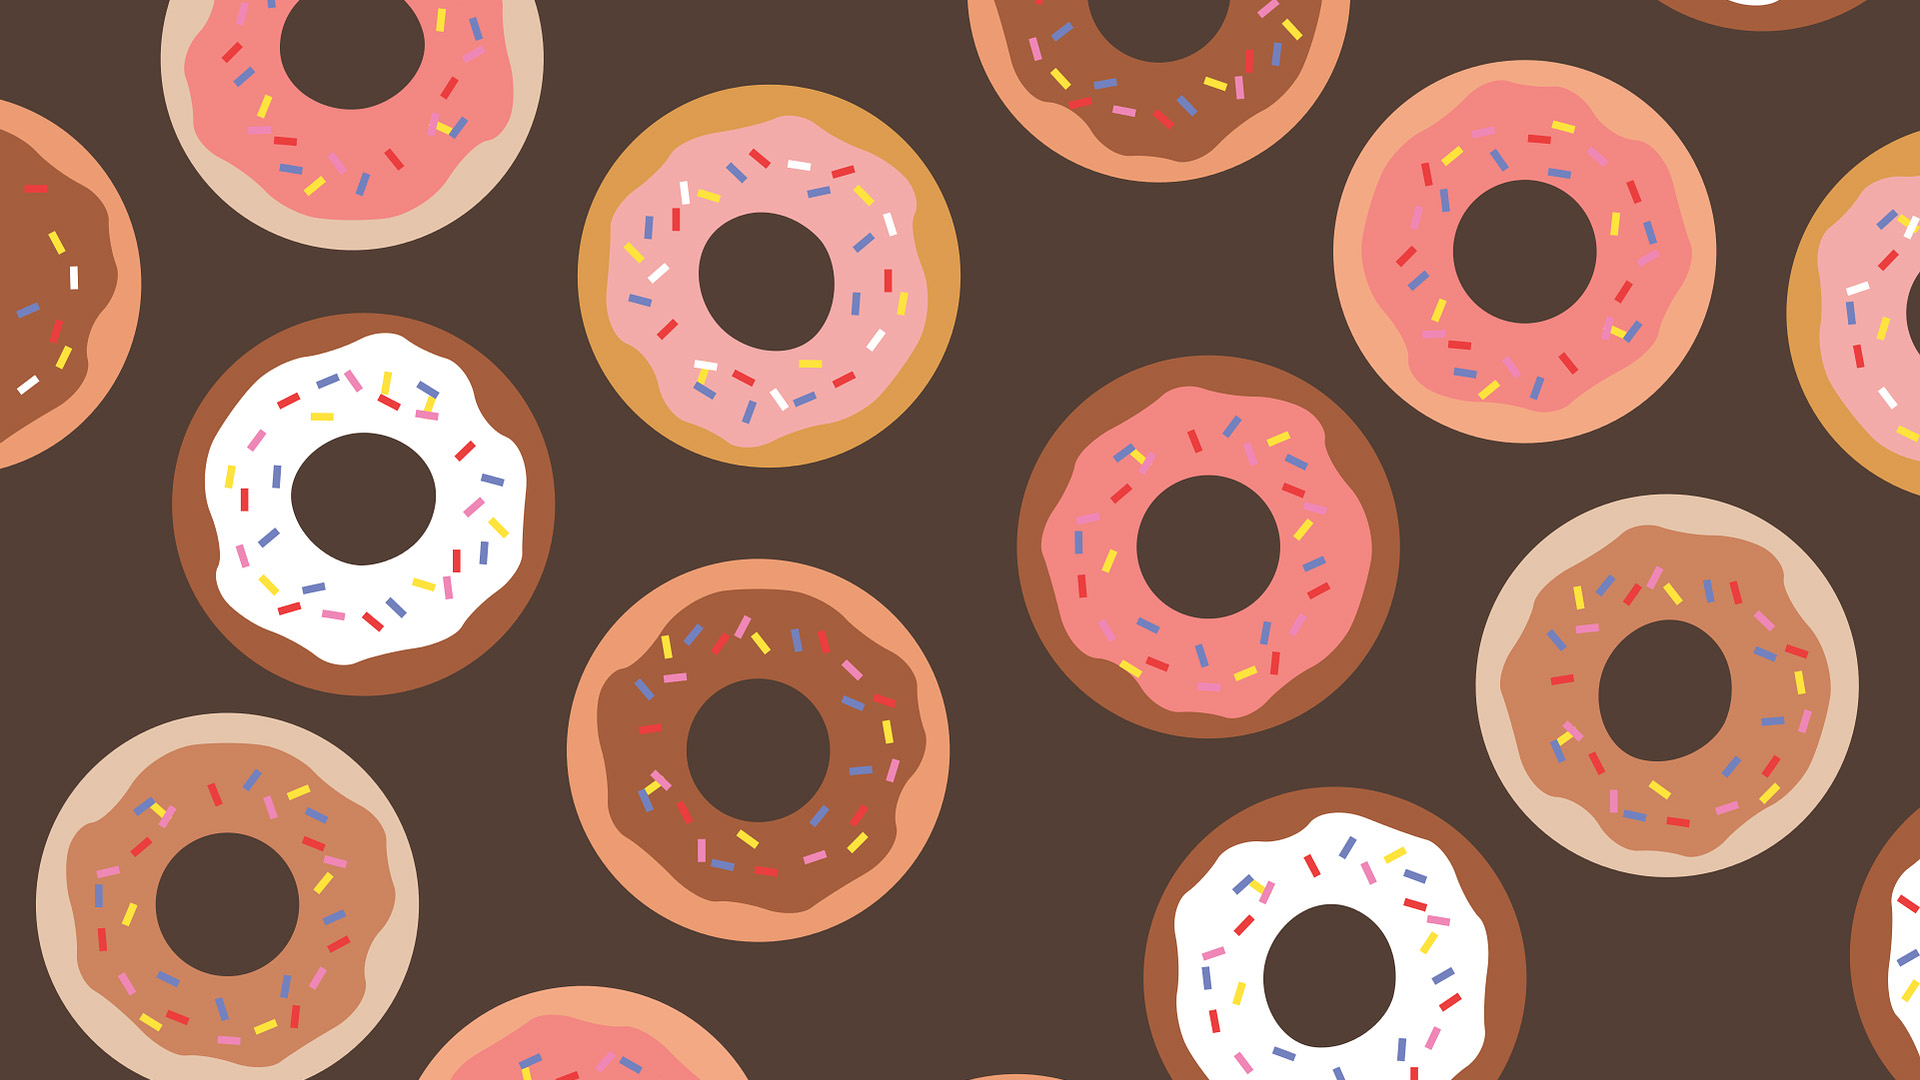 Dark brown background with illustrated donut pattern with pink, white, and brown frosting on top with sprinkles.